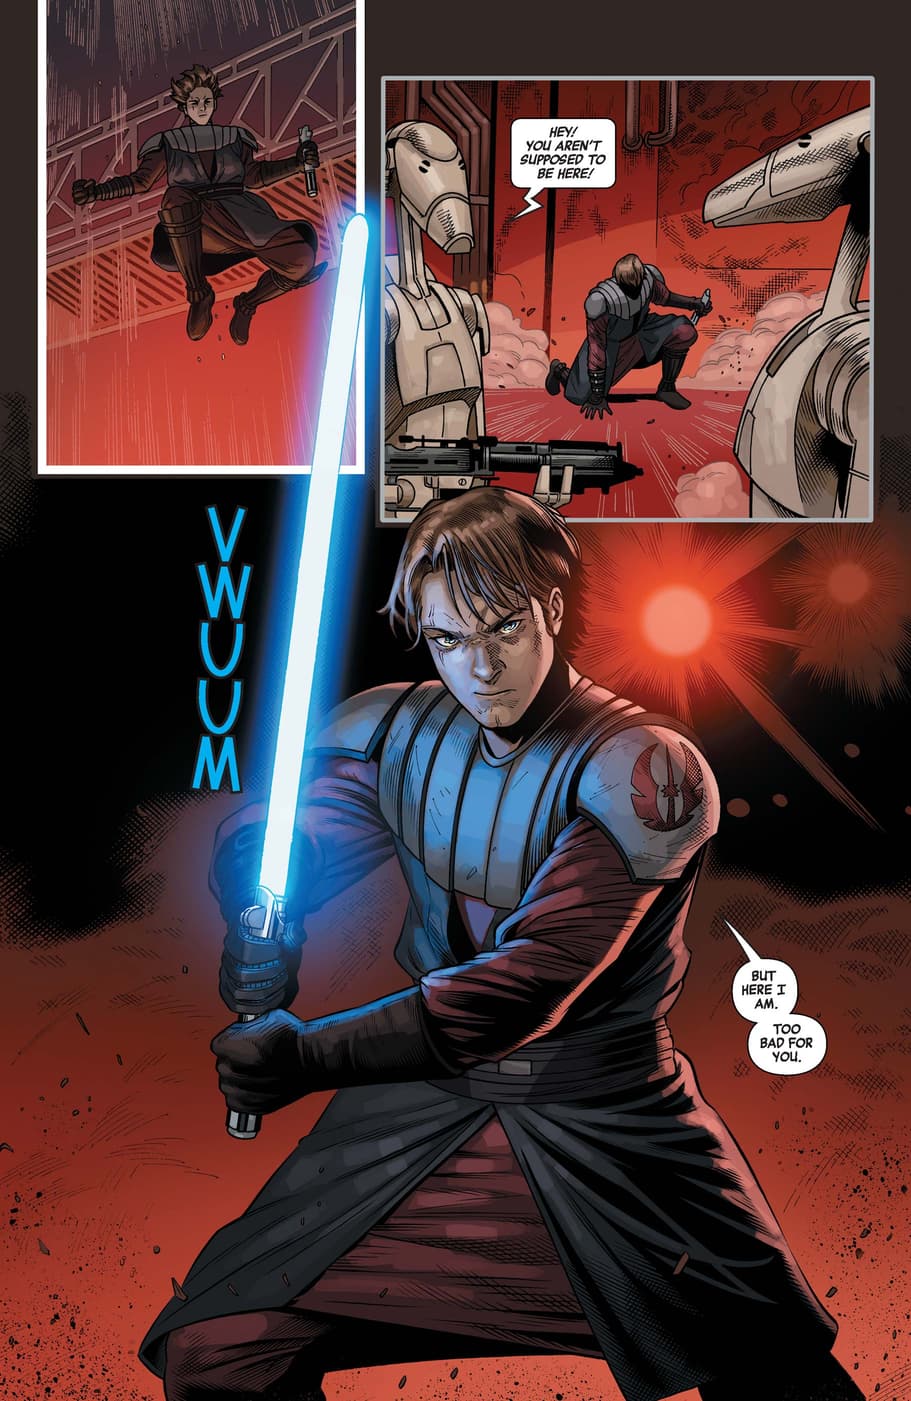 Anakin enraged at the use of slaves in STAR WARS: AGE OF REPUBLIC - ANAKIN SKYWALKER (2019) #1.